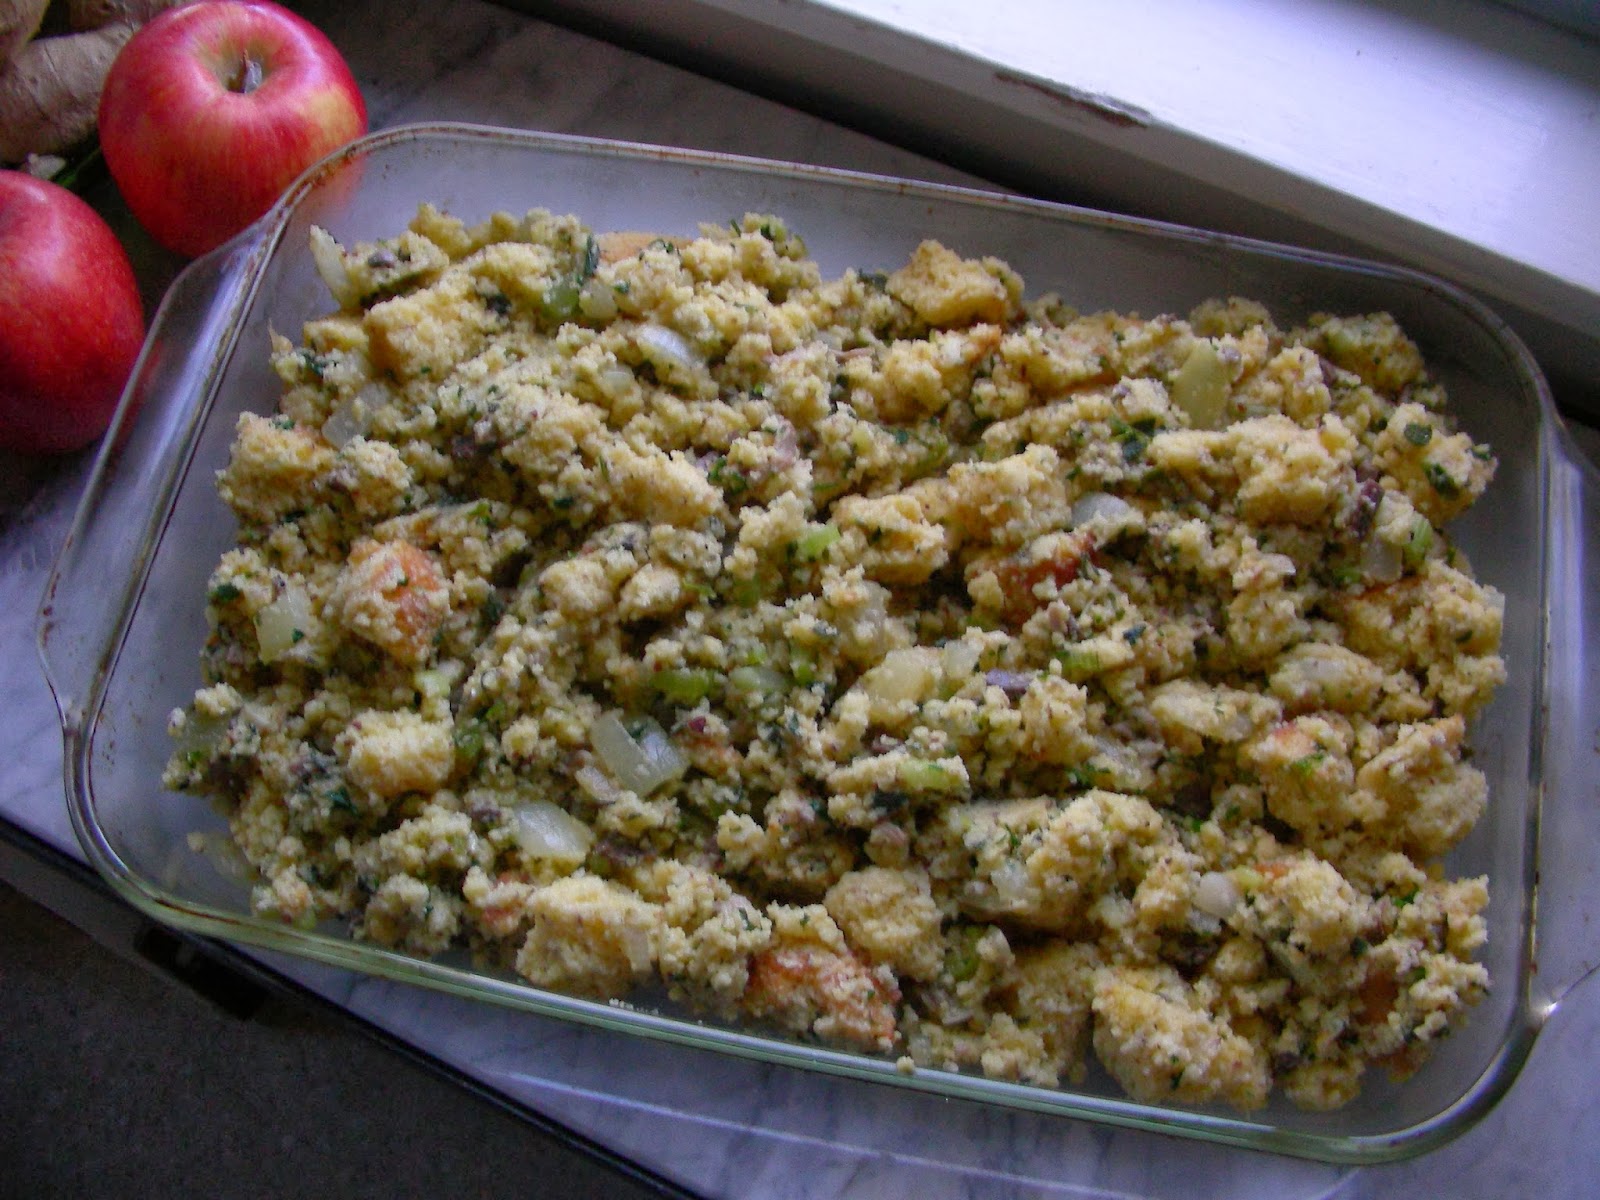 Can cornbread dressing spoil? - Foodly